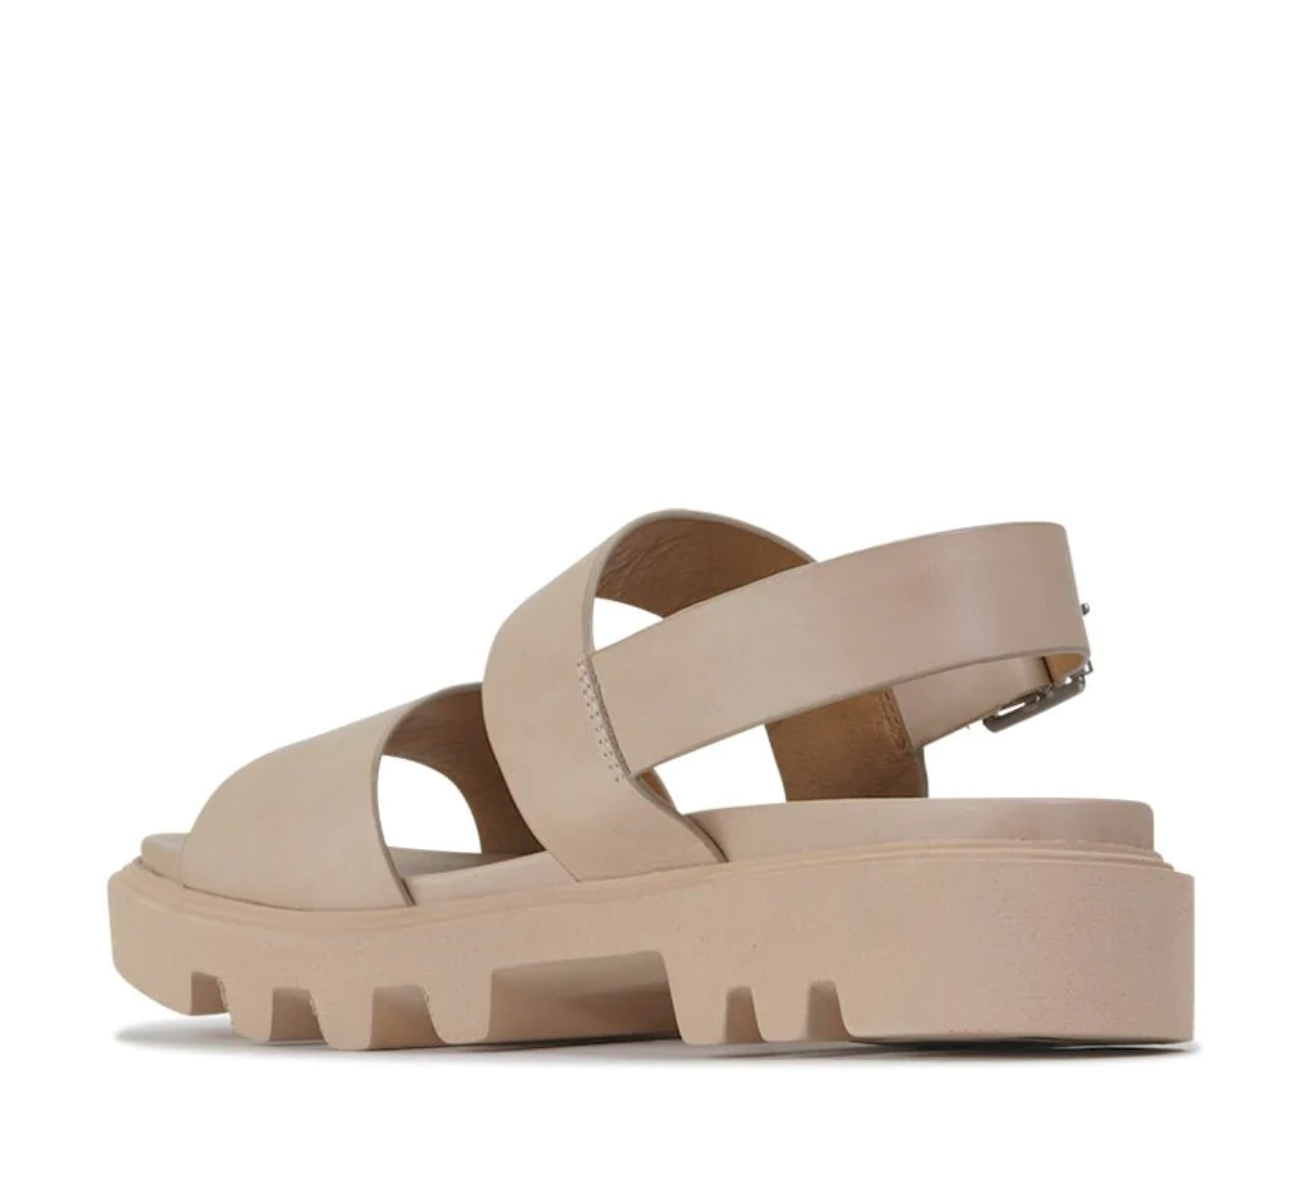 EOS FLIGHT NUDE - Women Sandals - Collective Shoes 